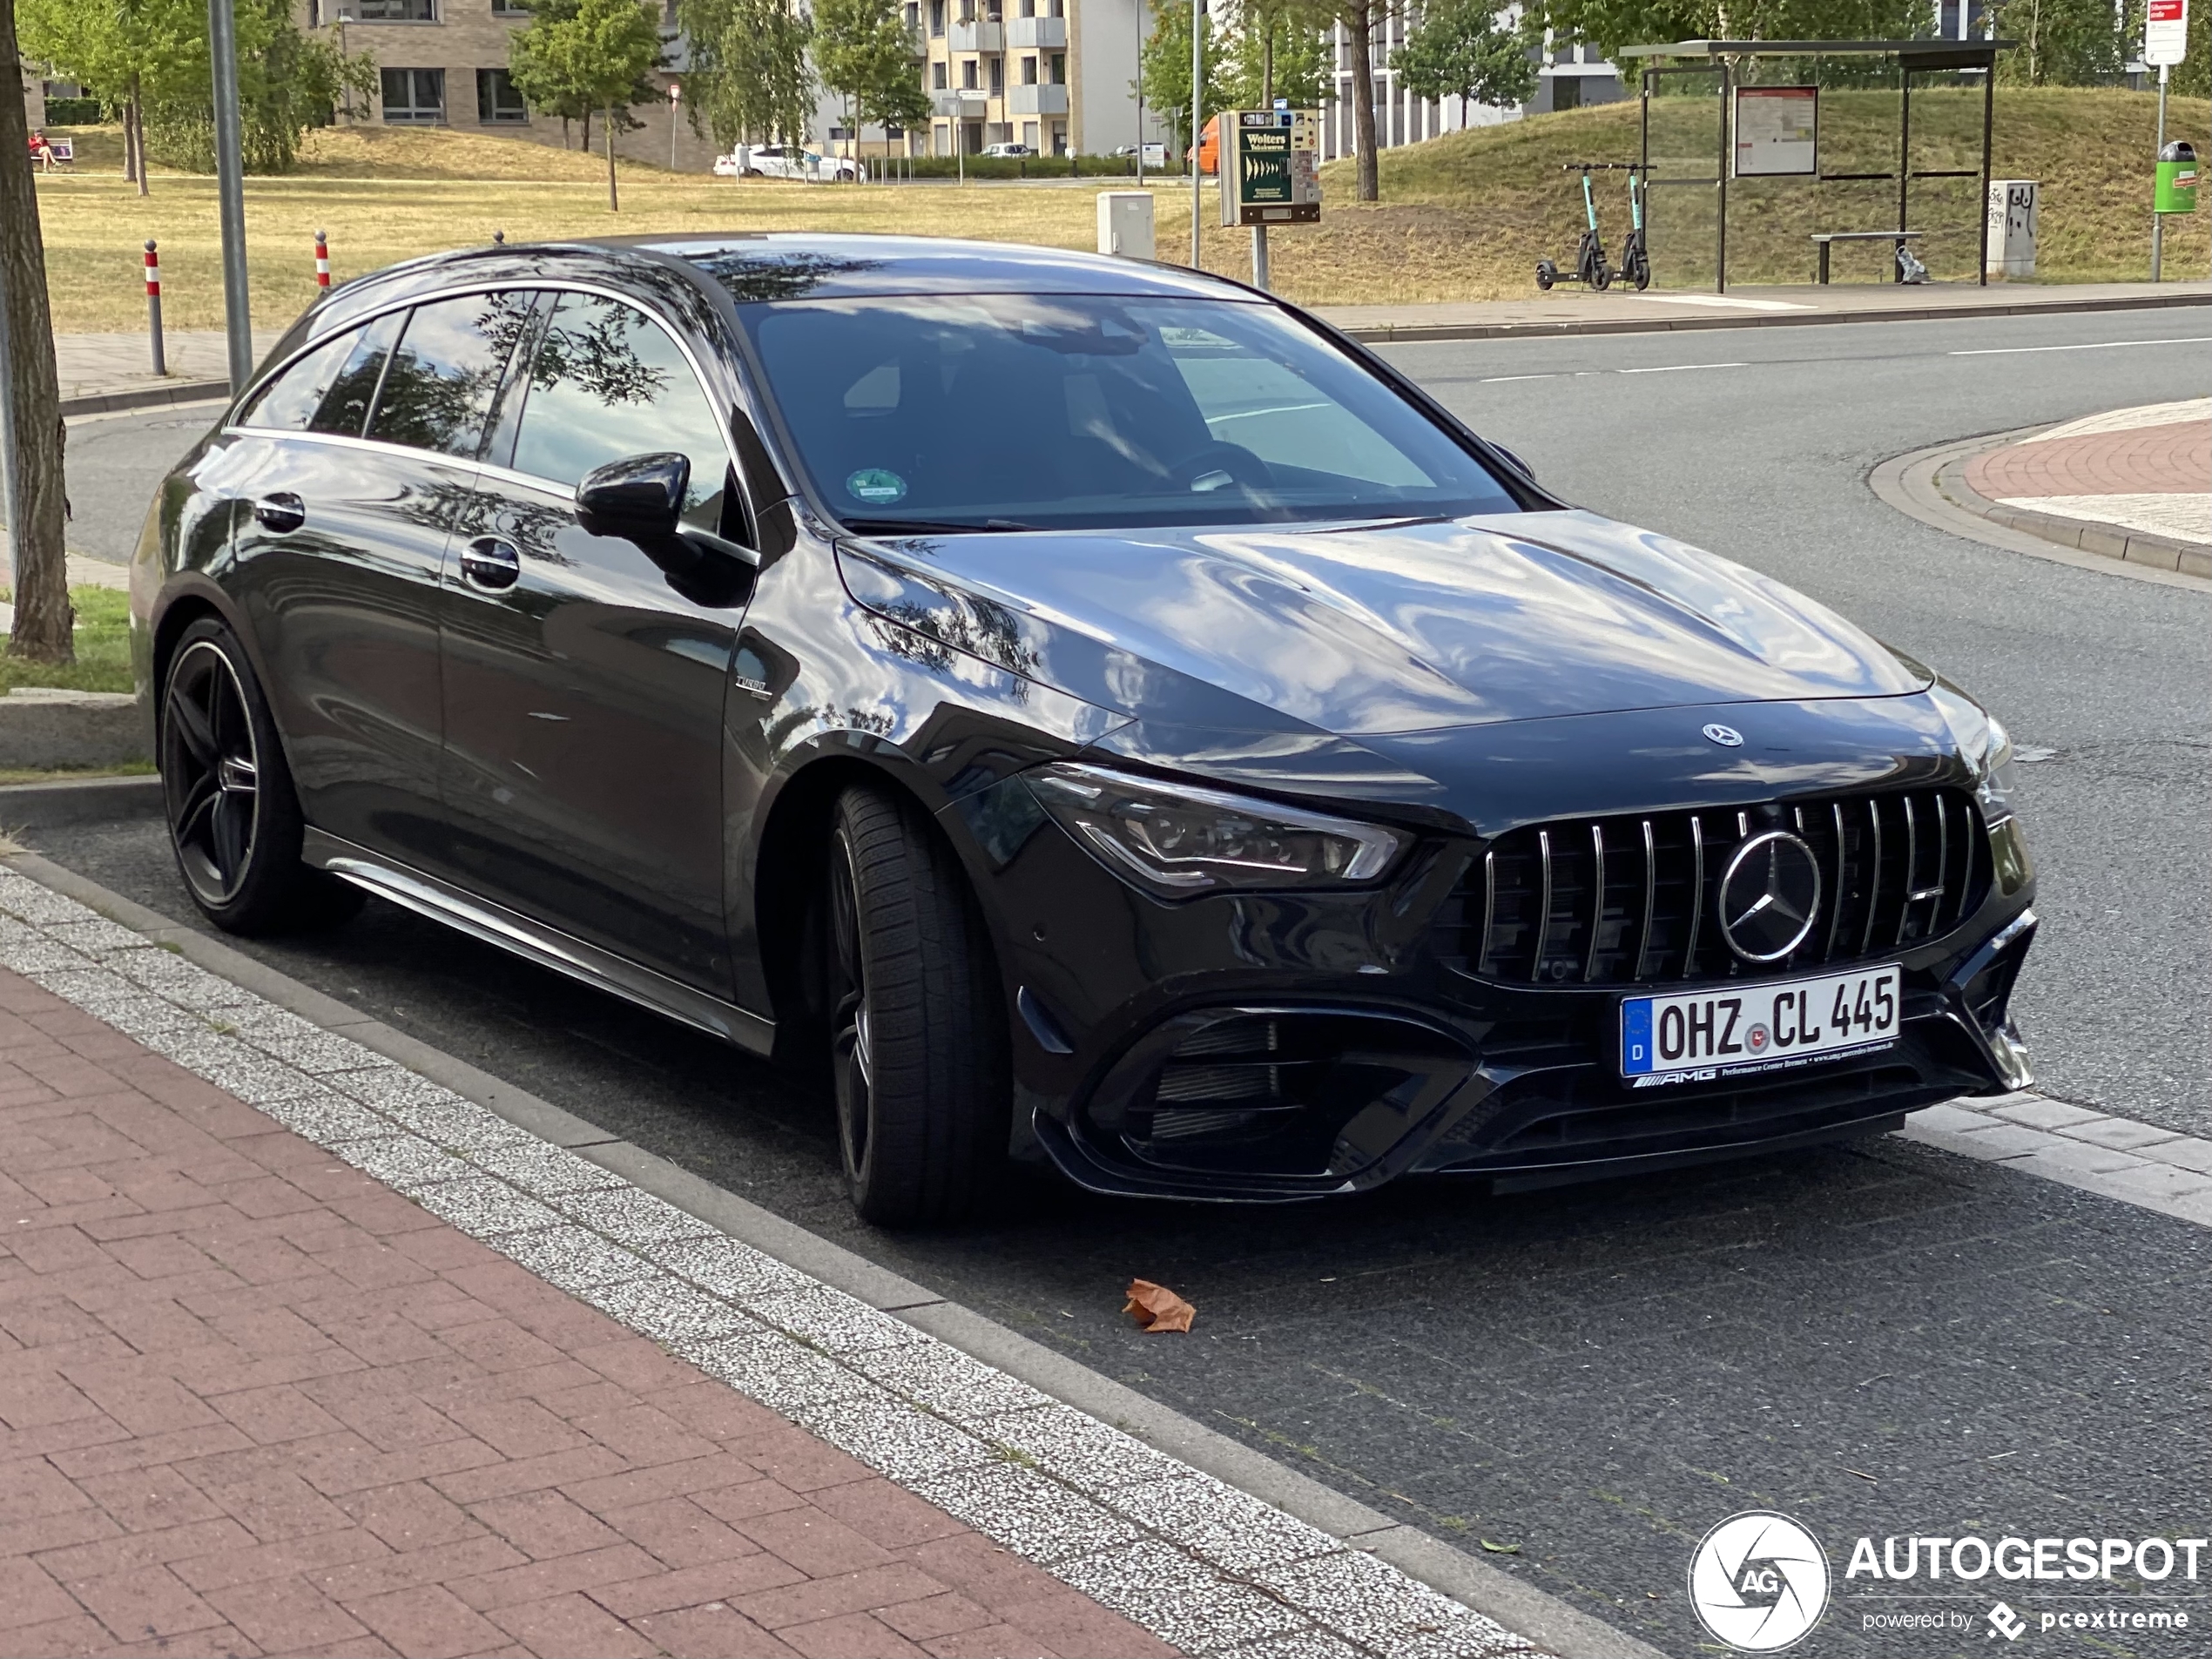 Mercedes CLA 45 AMG Shooting Brake in Petrol-Chrom spotted…